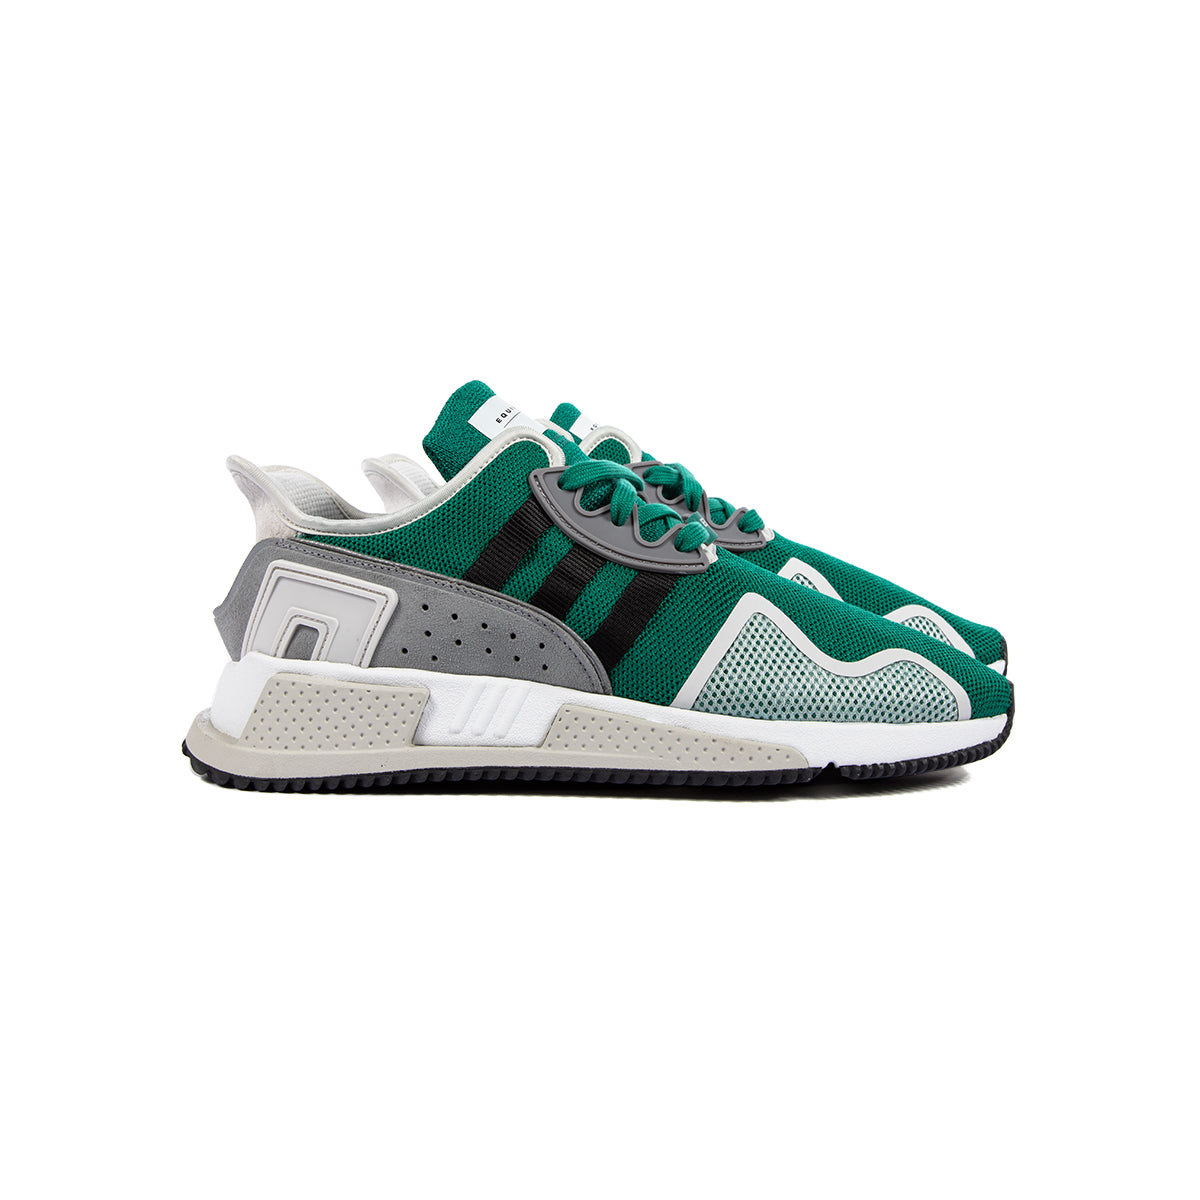 Featured image of post Adidas Eqt Basketball Adv Grey One Sub Green Our wide selection is eligible for free shipping and free returns